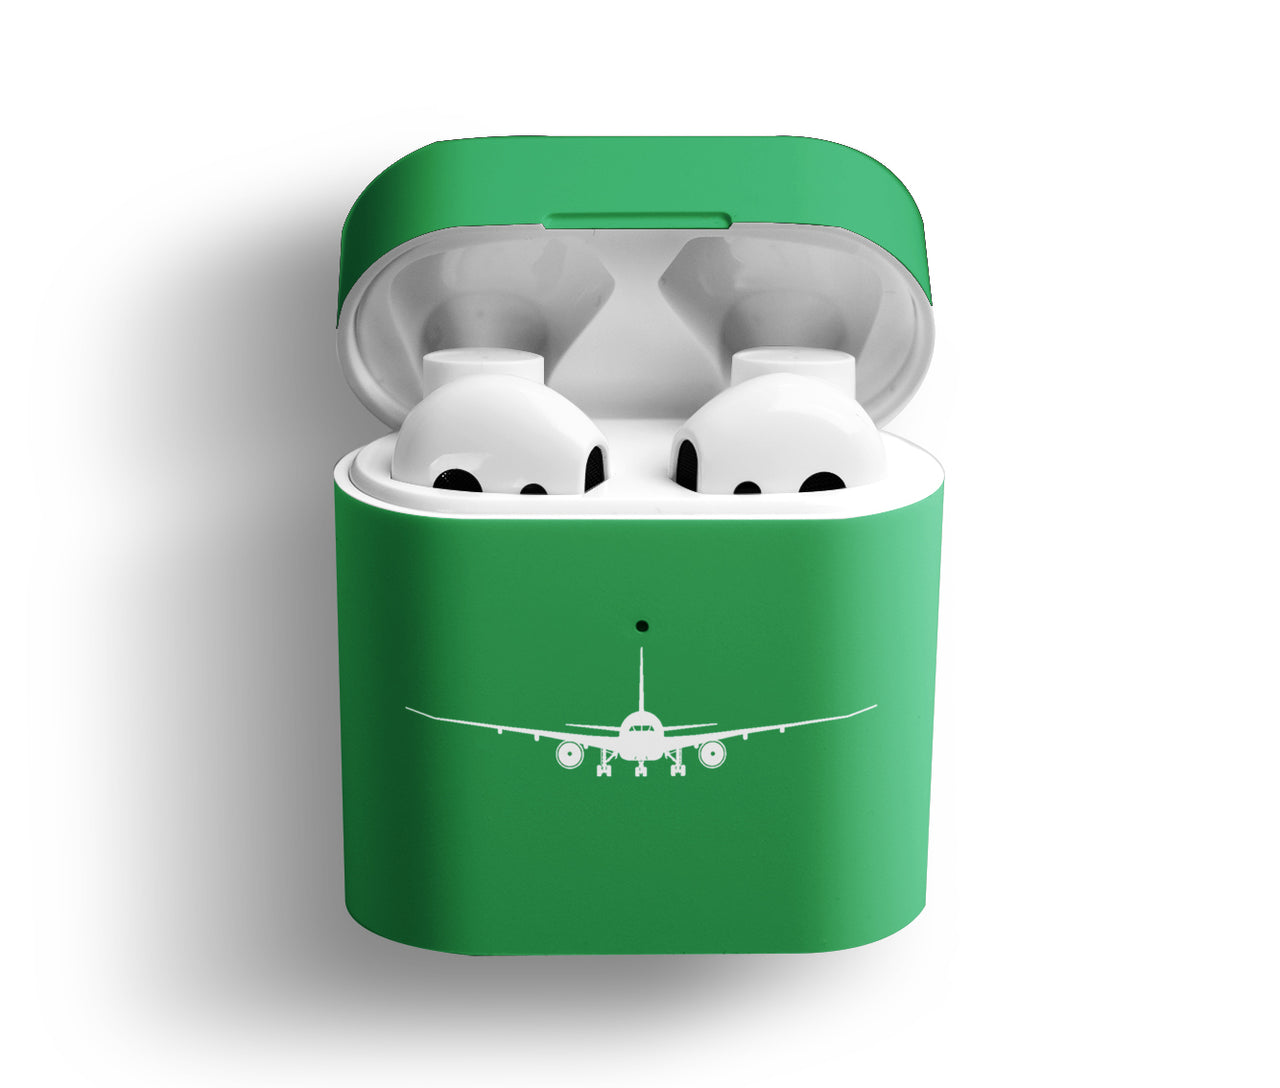 Boeing 787 Silhouette Designed AirPods Cases